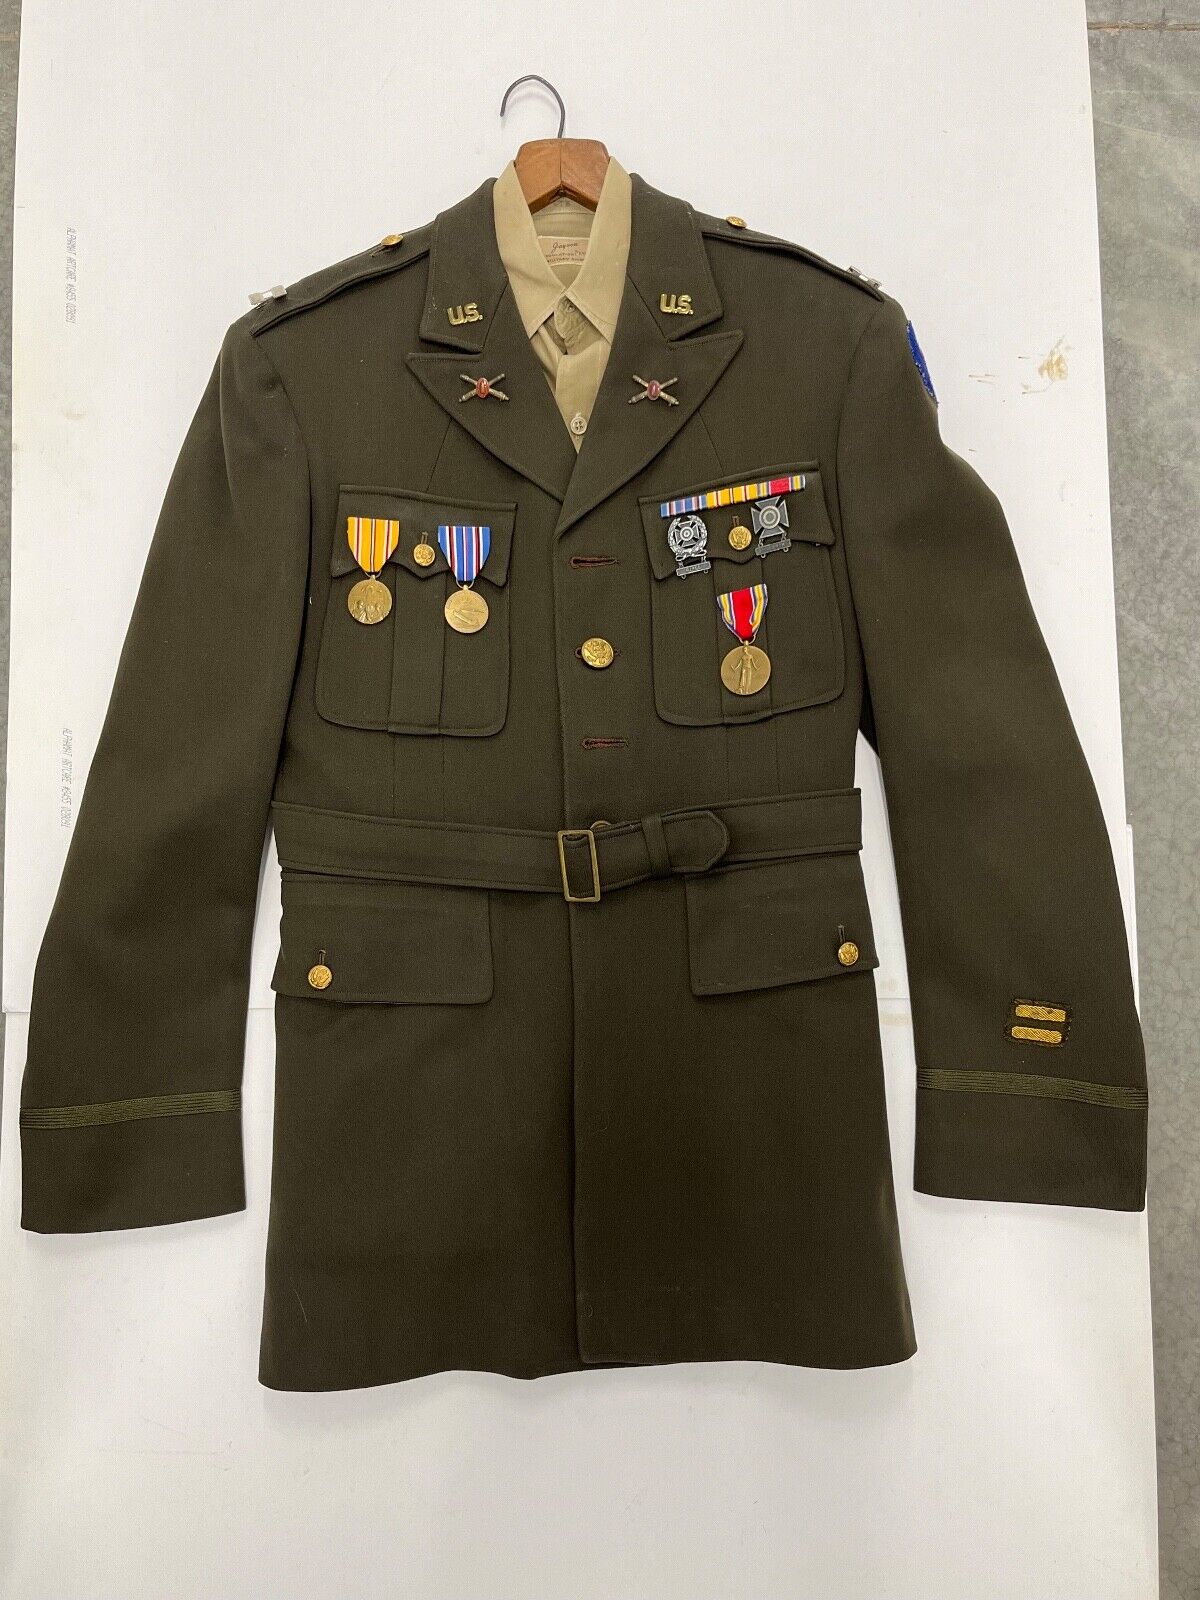 1940s WWII US Army Officer Captains Jacket and Shirt with Medals & Cap